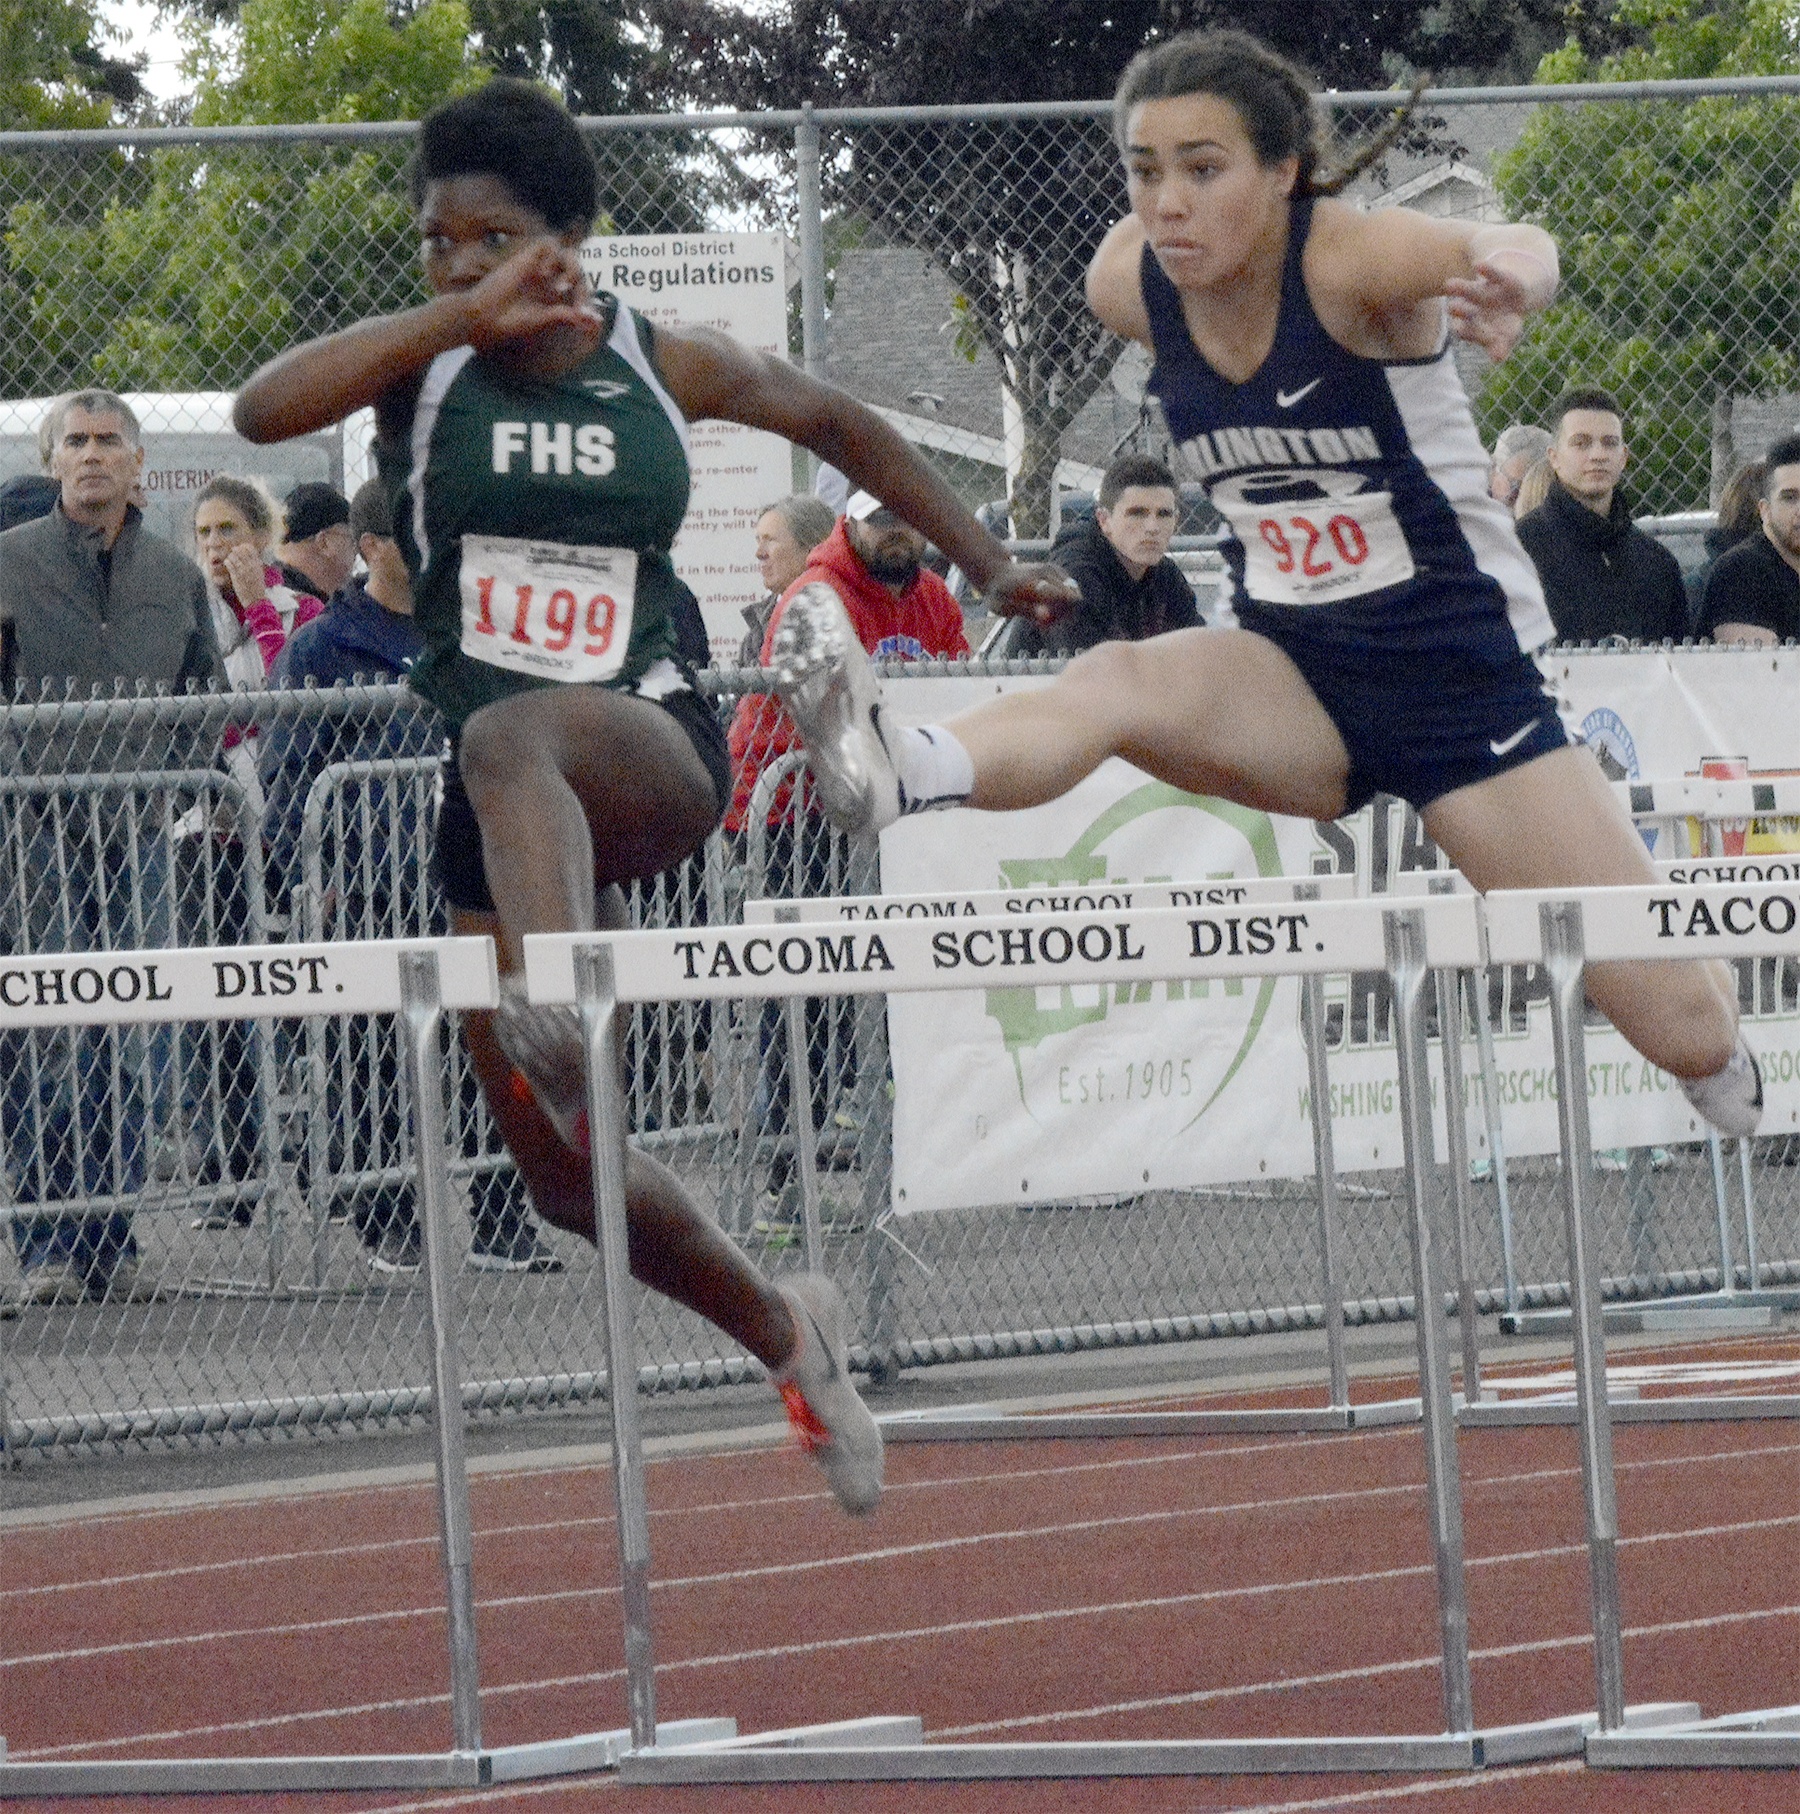 Sydney Trinidad had the fastest time at state going into the hurdles finale.